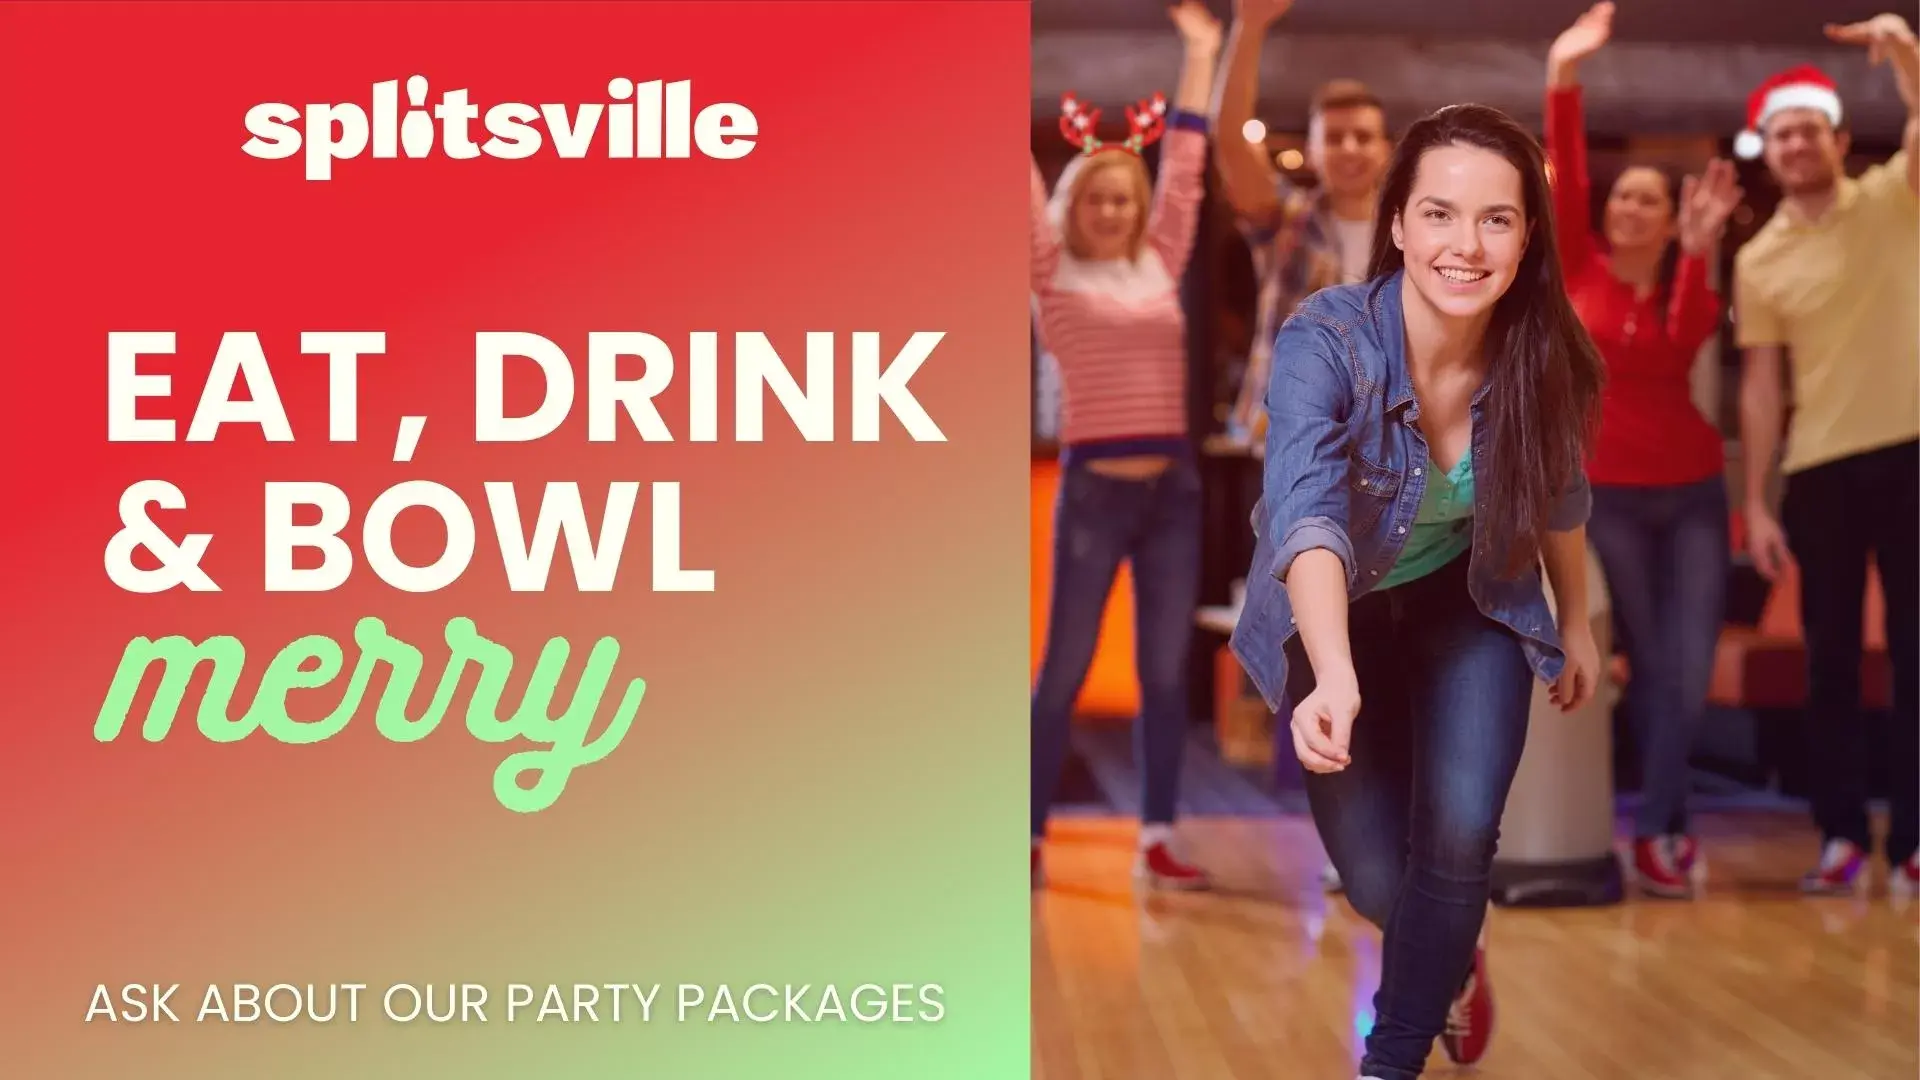 Eat drink and bowl merry with holiday parties at Splitsville